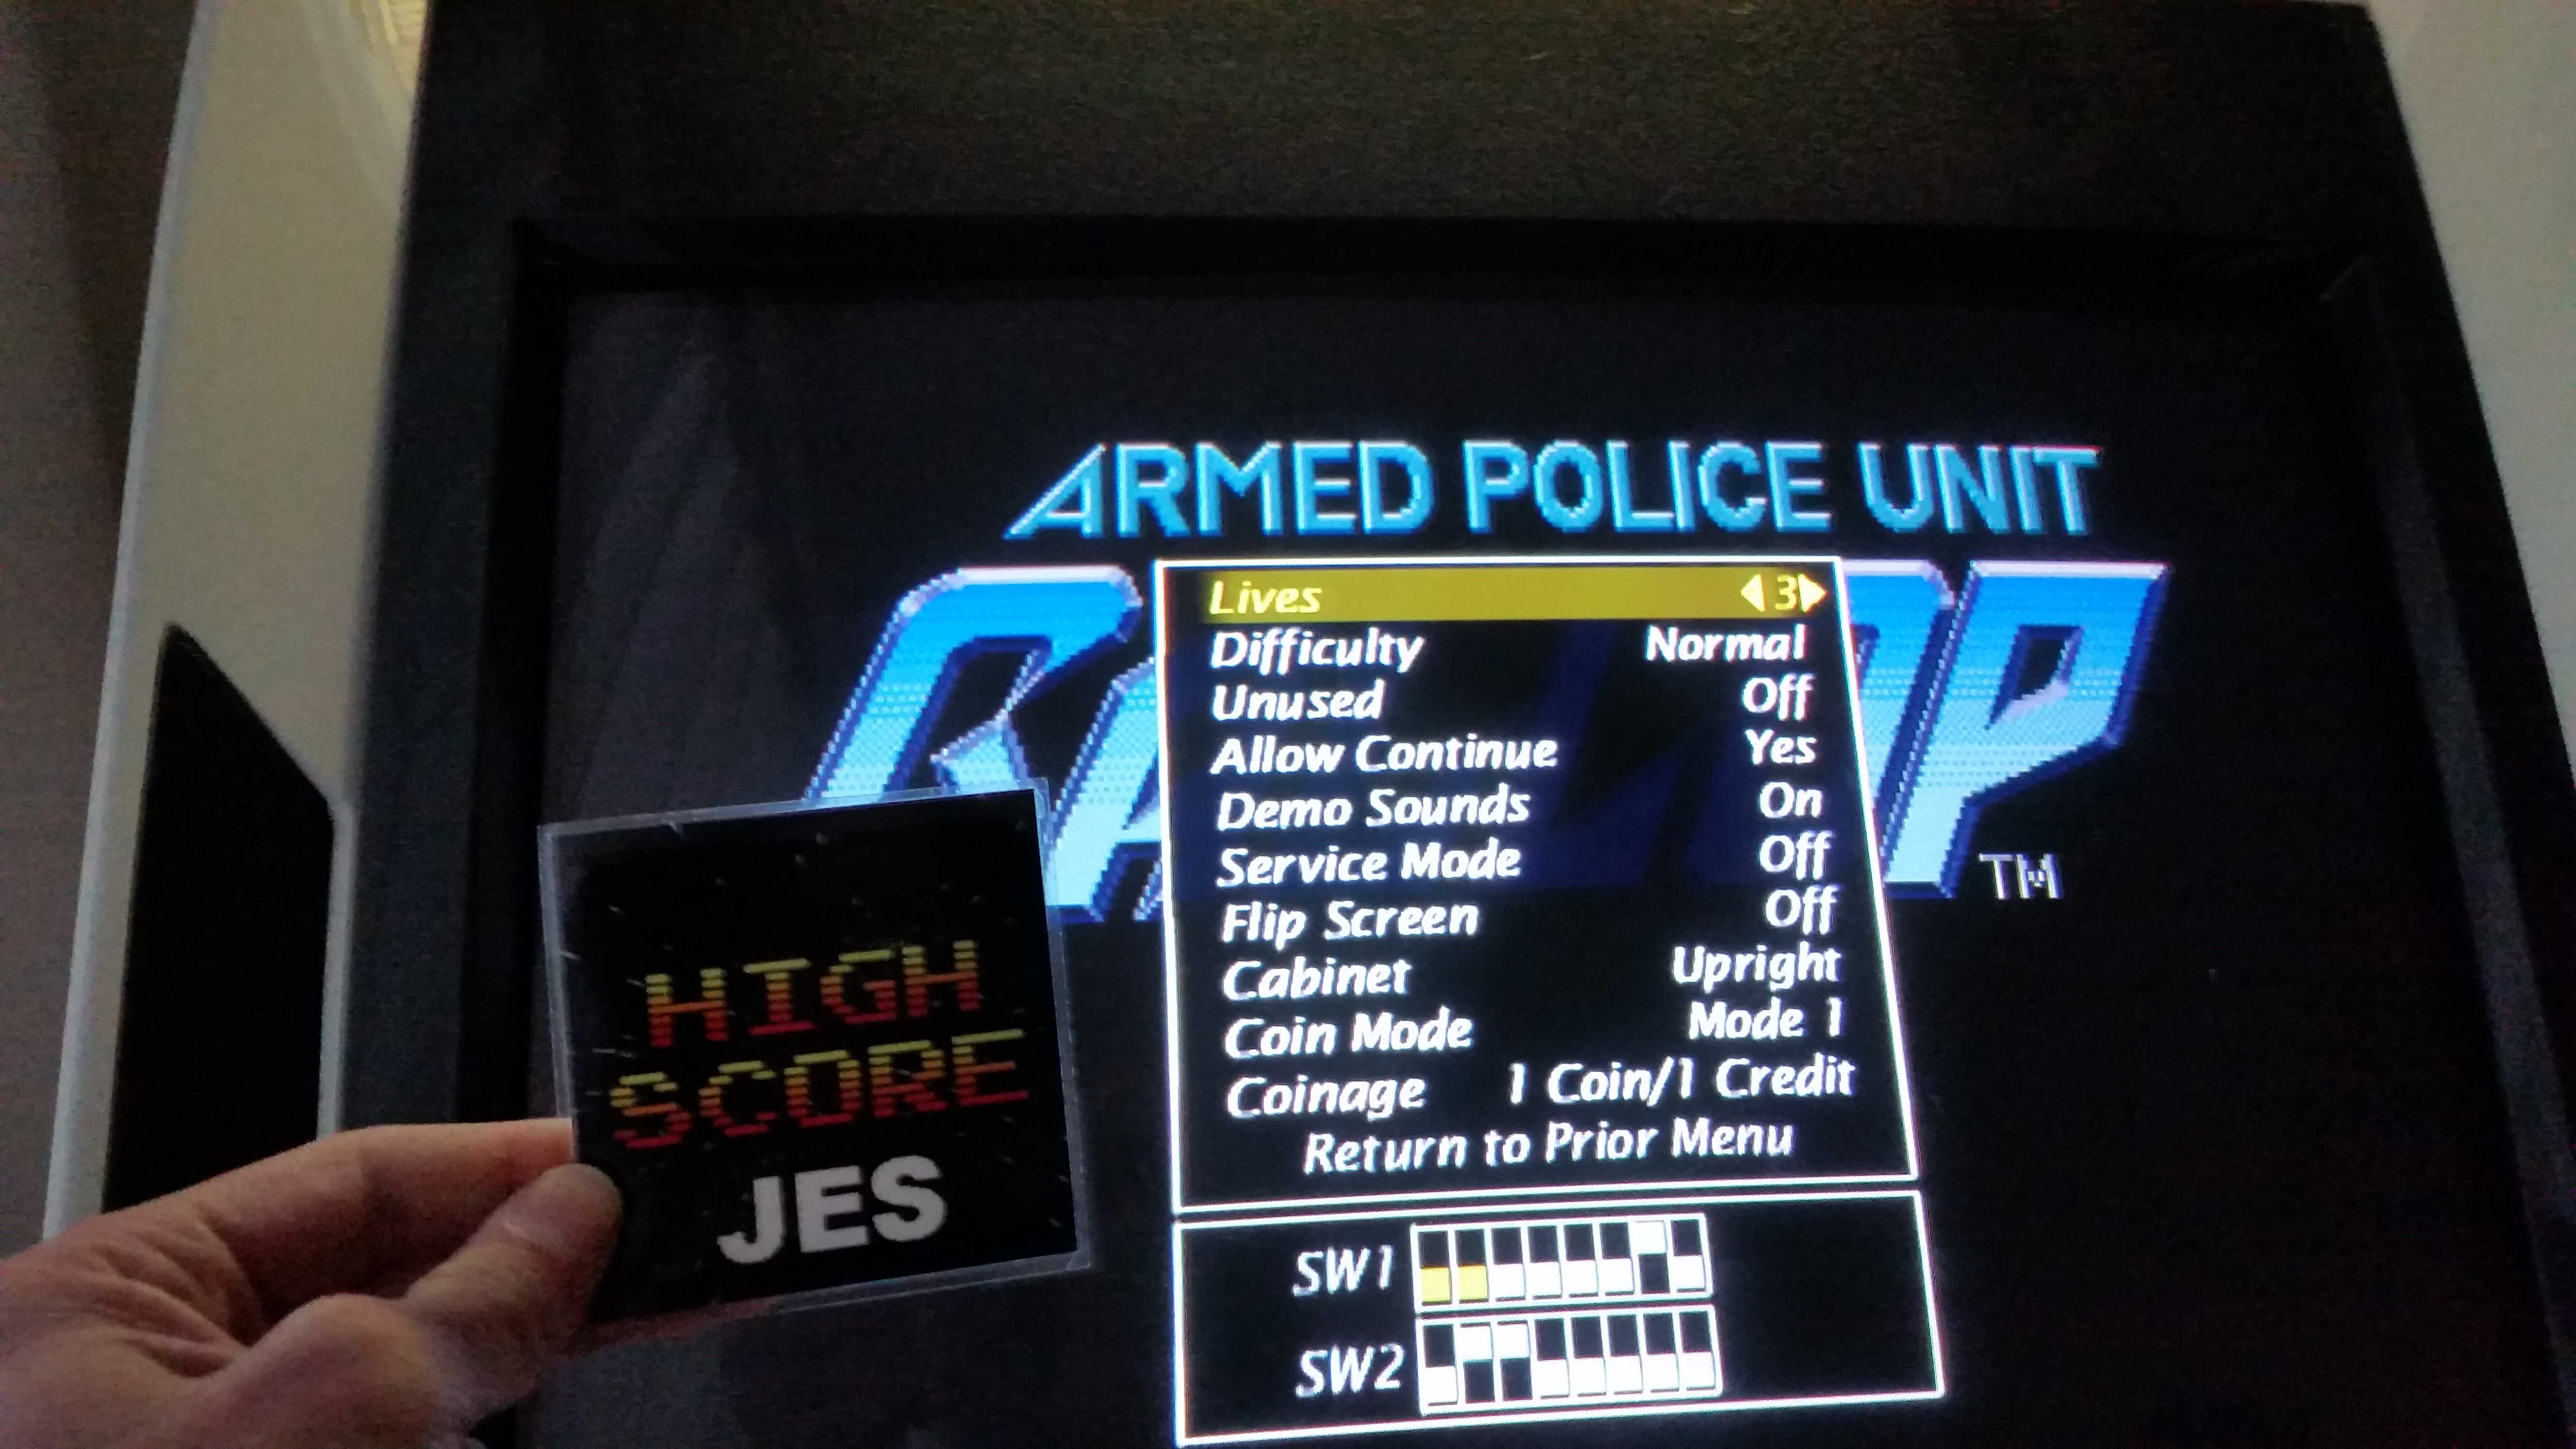 JES: Gallop: Armed Police Unit [gallop] (Arcade Emulated / M.A.M.E.) 60,380 points on 2016-12-18 22:23:58